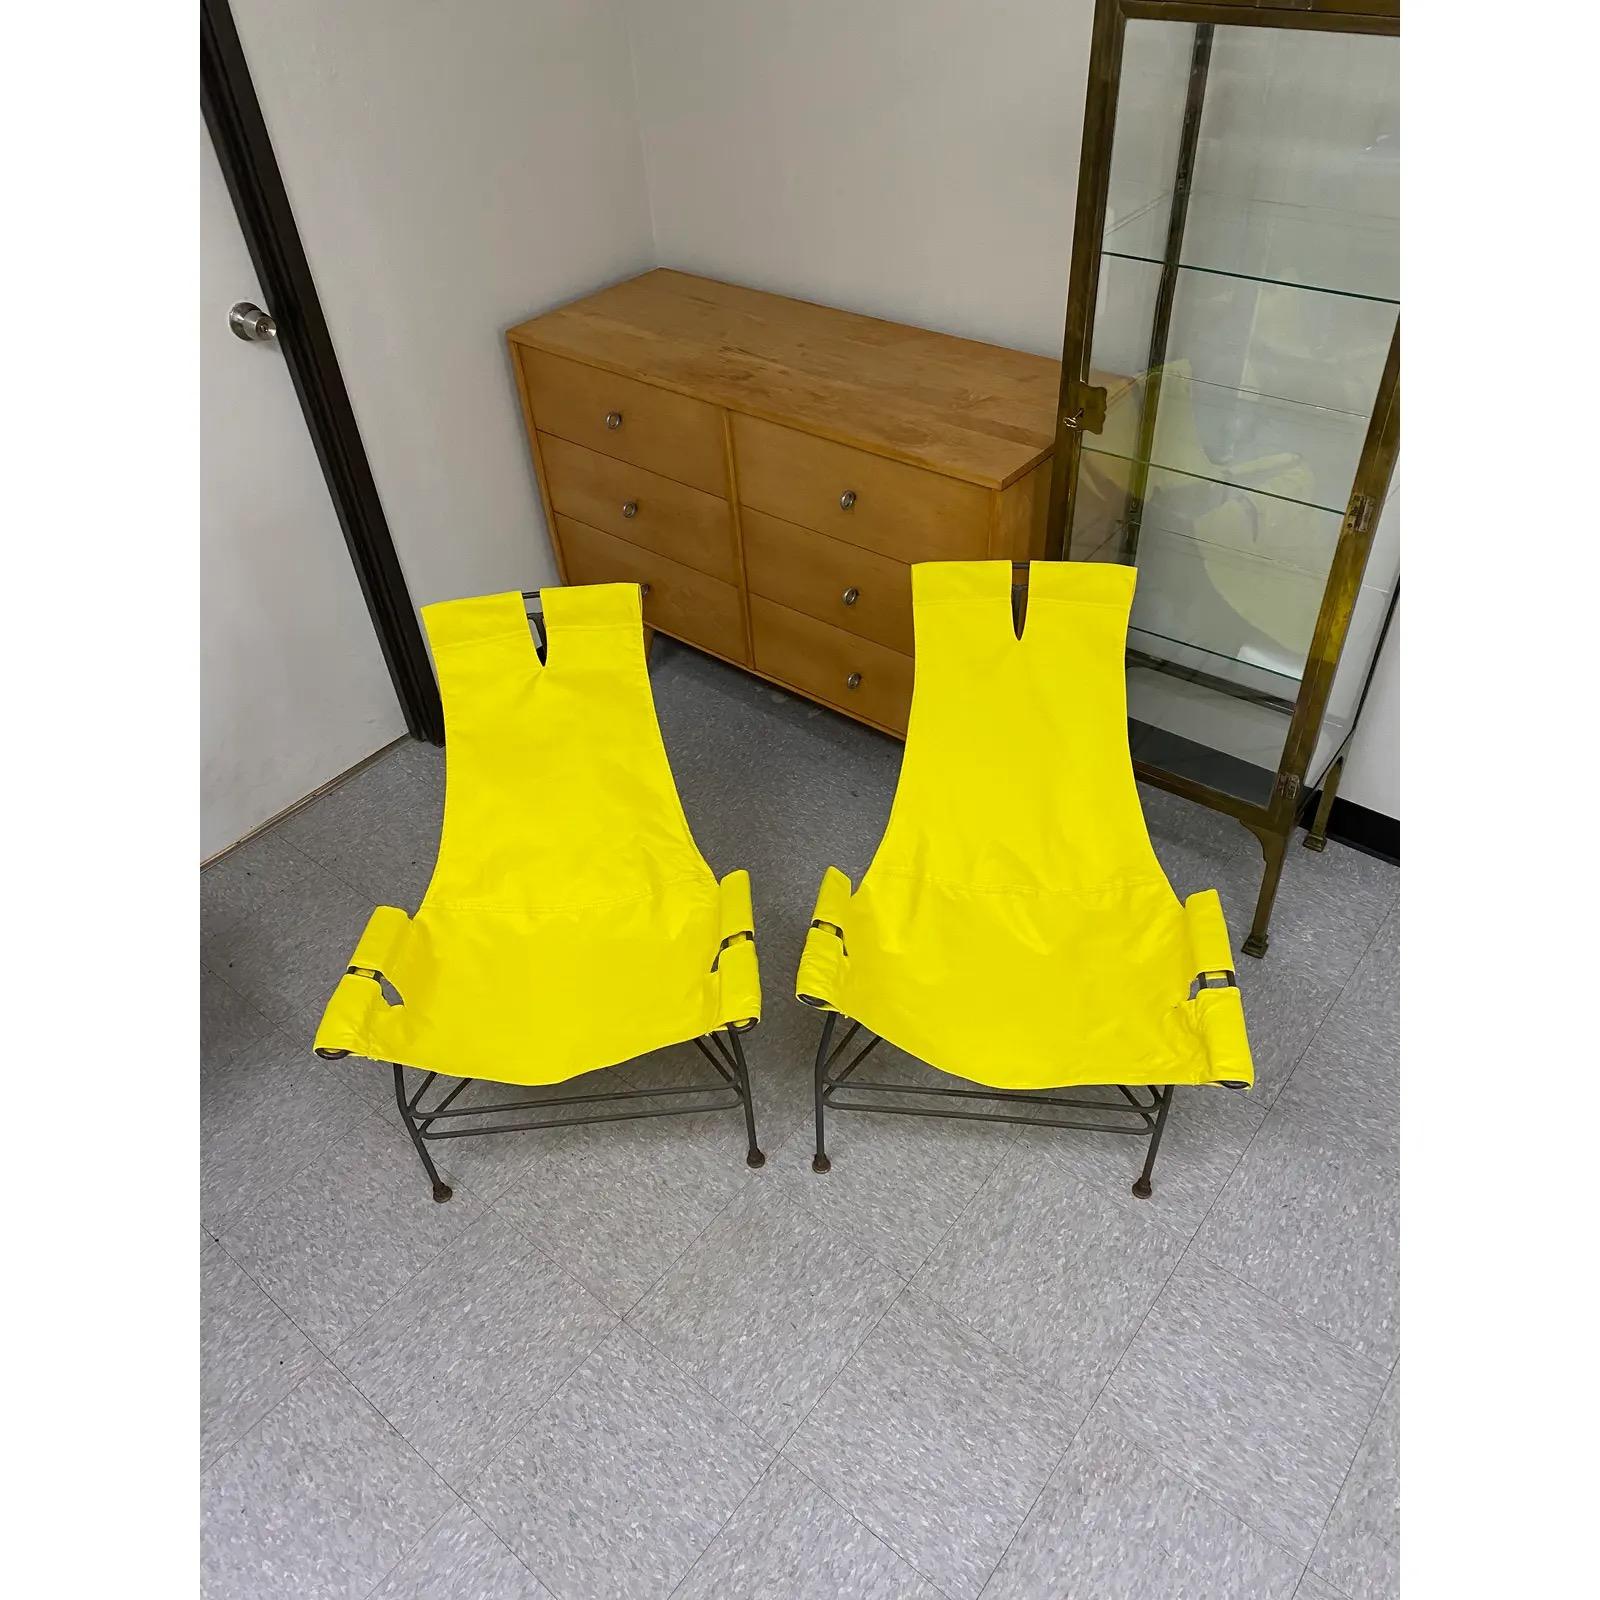 American Midcentury Modern Jerry Johnson Iron Sling Chairs, a Pair For Sale